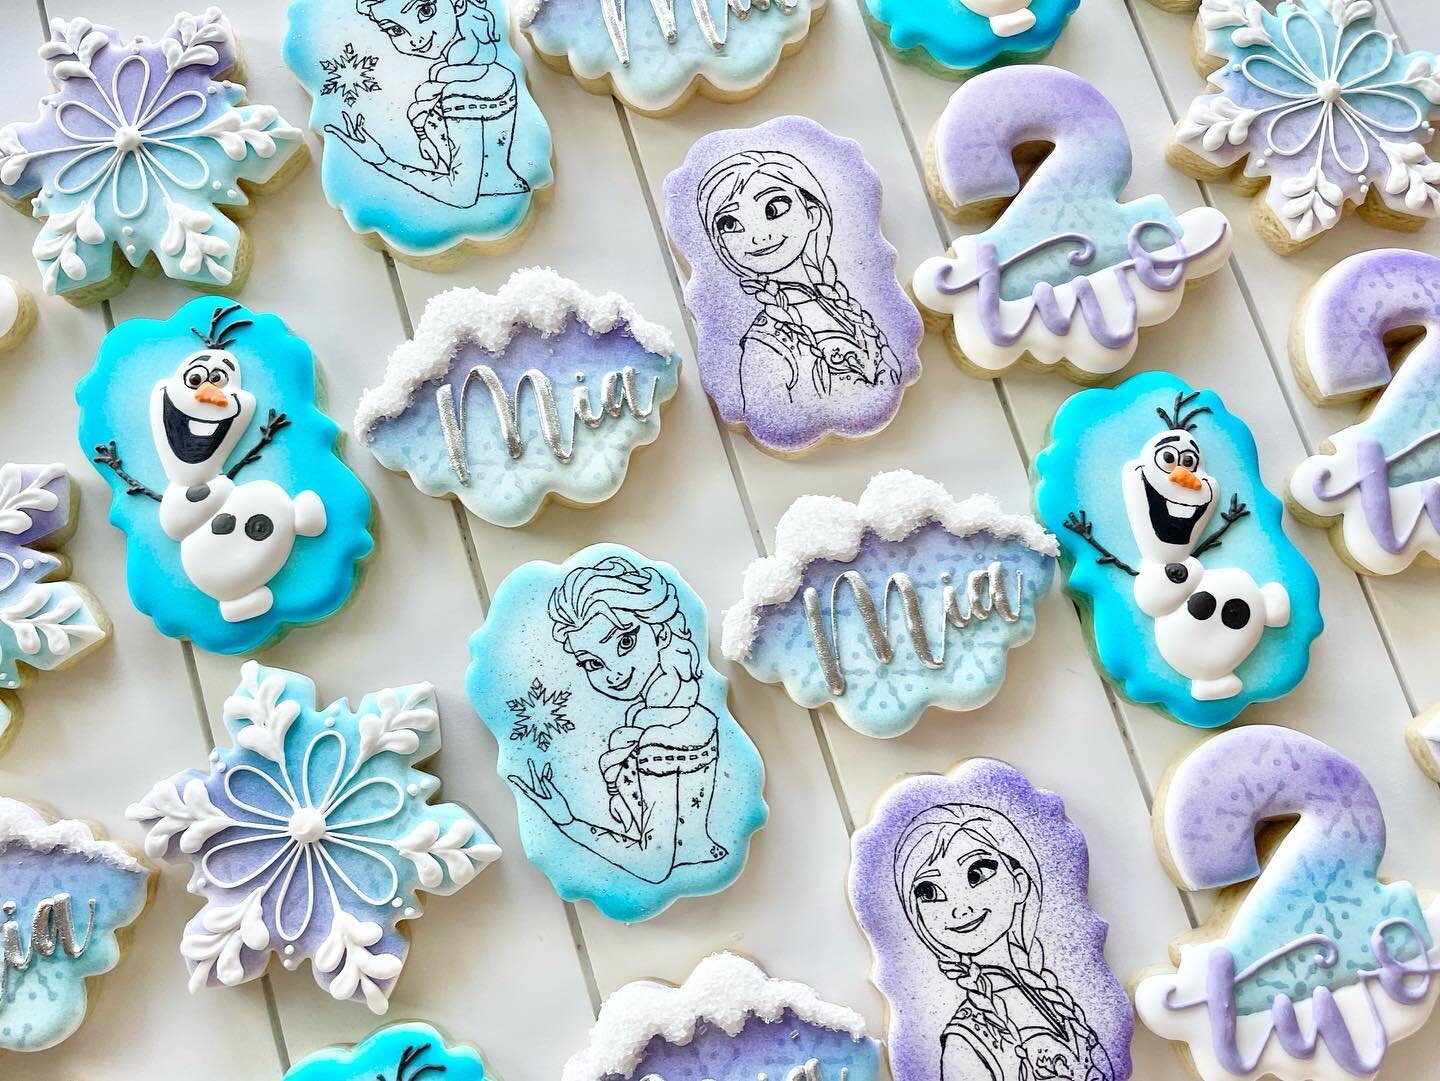 Frozen cookies in honor of this cooler weather we have had this week. ❄️ ⛄️ 
.
Happy Birthday Mia
.
.
.
.
#frozen #anna #elsa #olaf #snowflakes #frozencookies #annaandelsa #elsacookies #snowflakes #thecoldneverbotheredmeanyway #sugarcookies #tampa #t